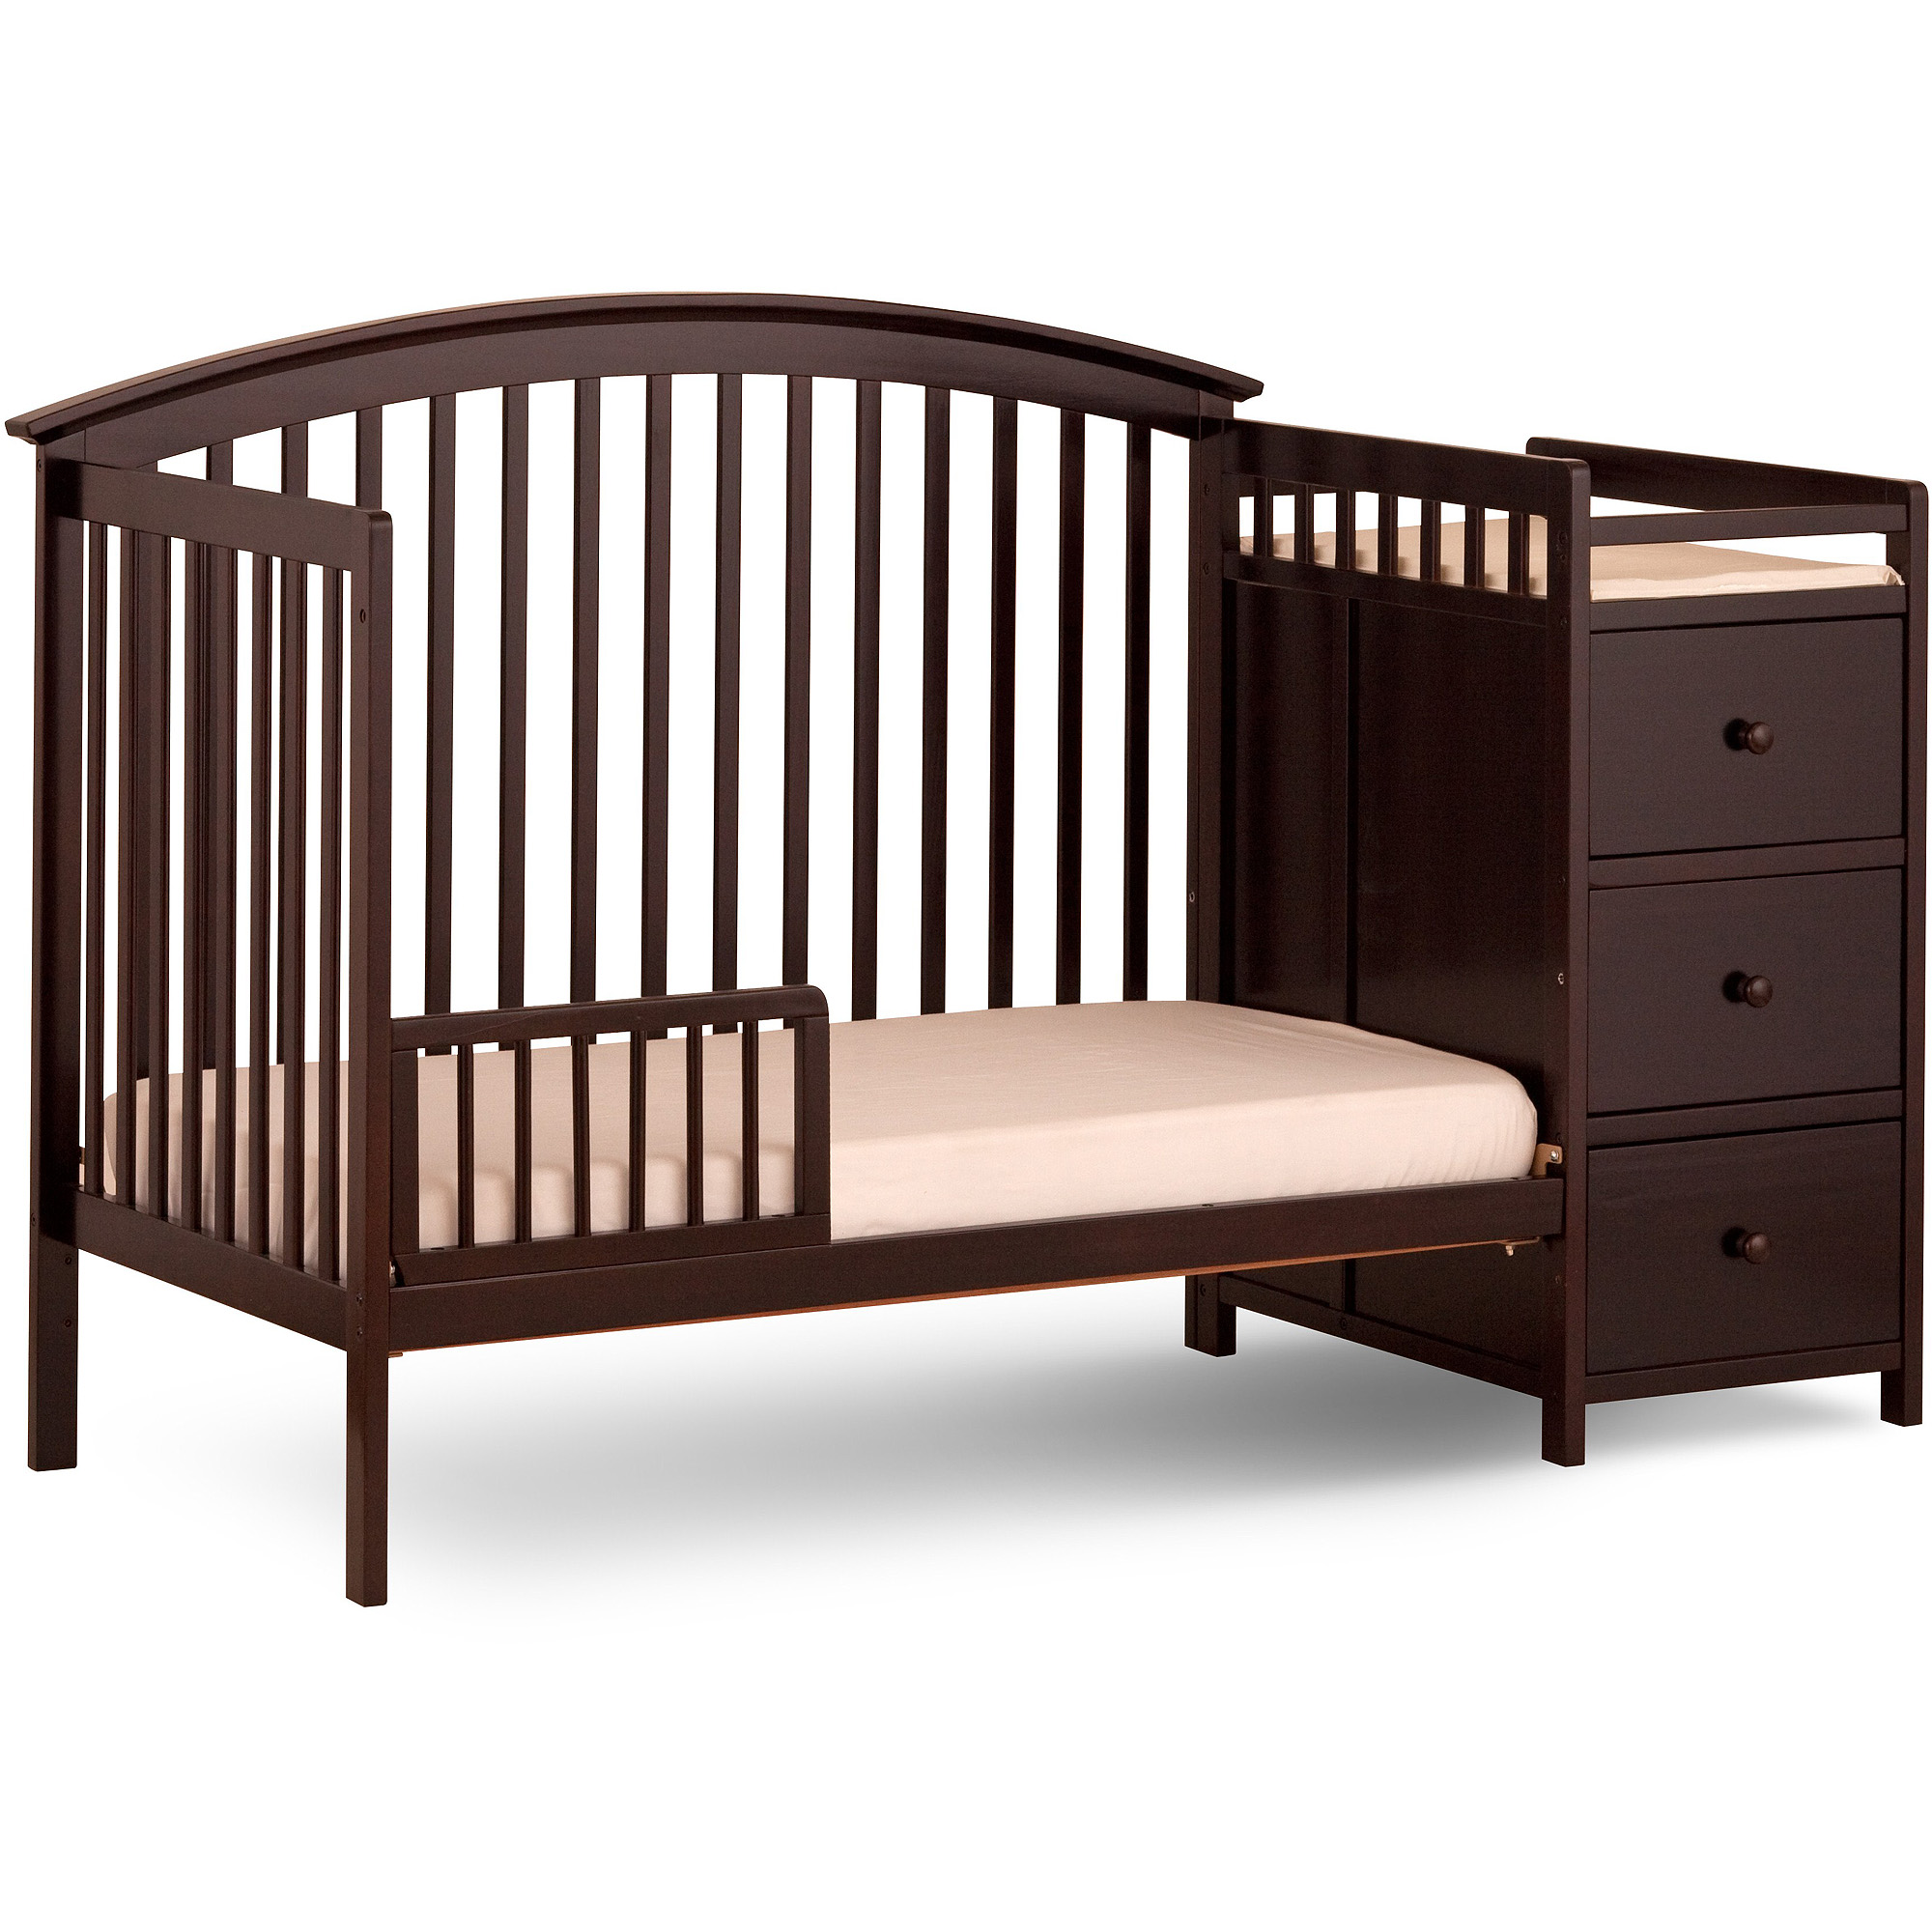 Storkcraft Bradford 4 in 1 Convertible Crib and Changer Espresso - image 4 of 10